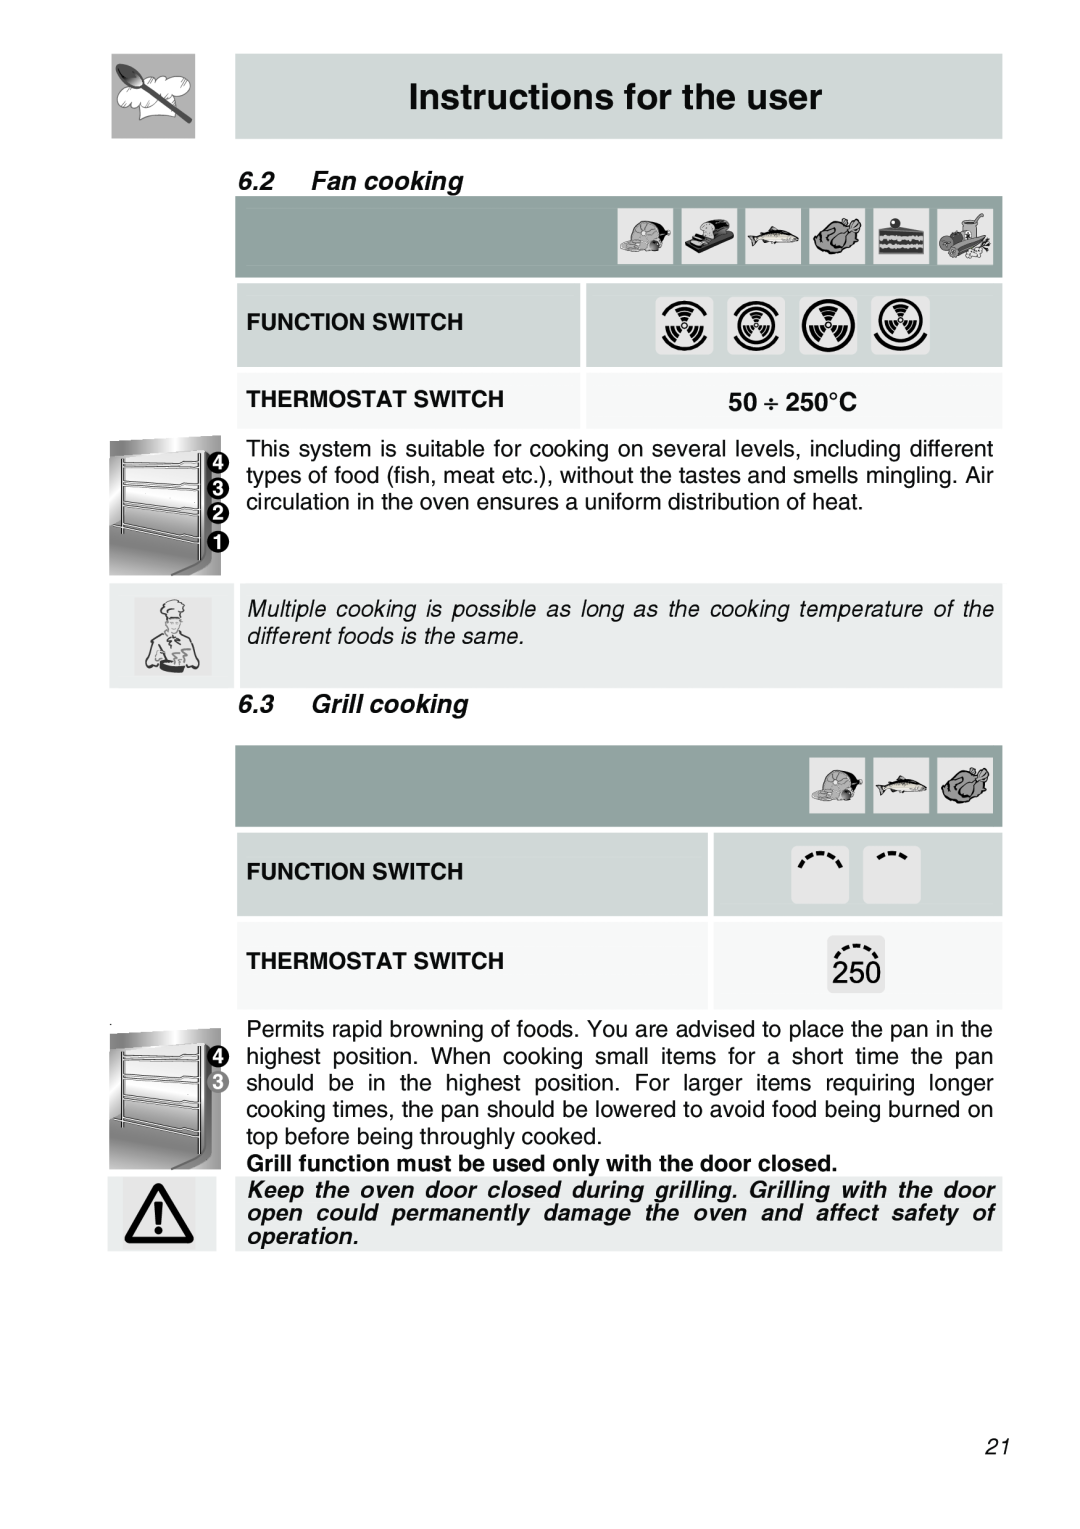 Smeg SCA310X 6.2Fan cooking, 6.3Grill cooking, Instructions for the user, 50 ⎟ 250C, Function Switch, Thermostat Switch 